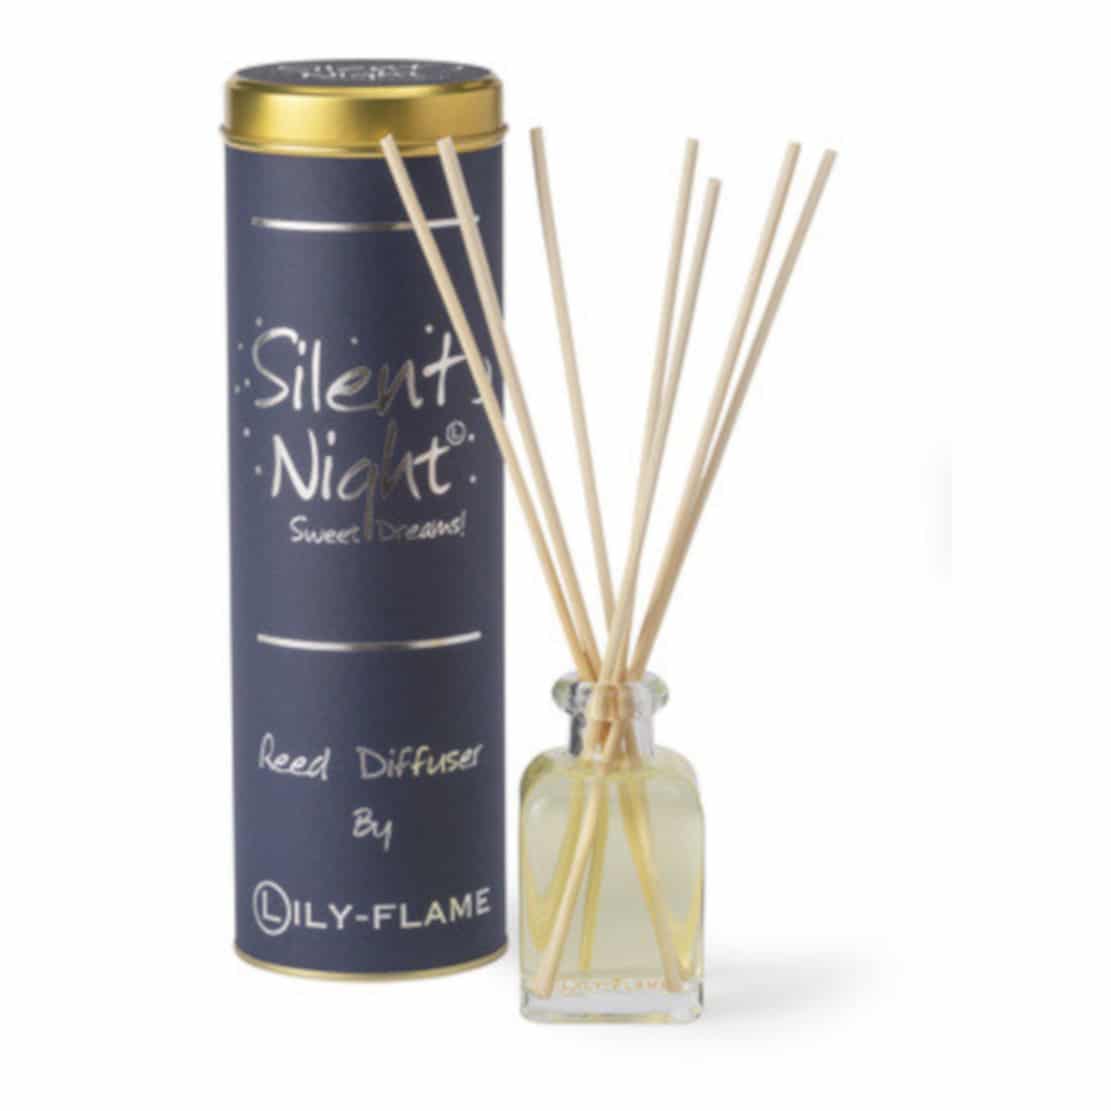 Lily Flame Silent Night Reed Diffuser